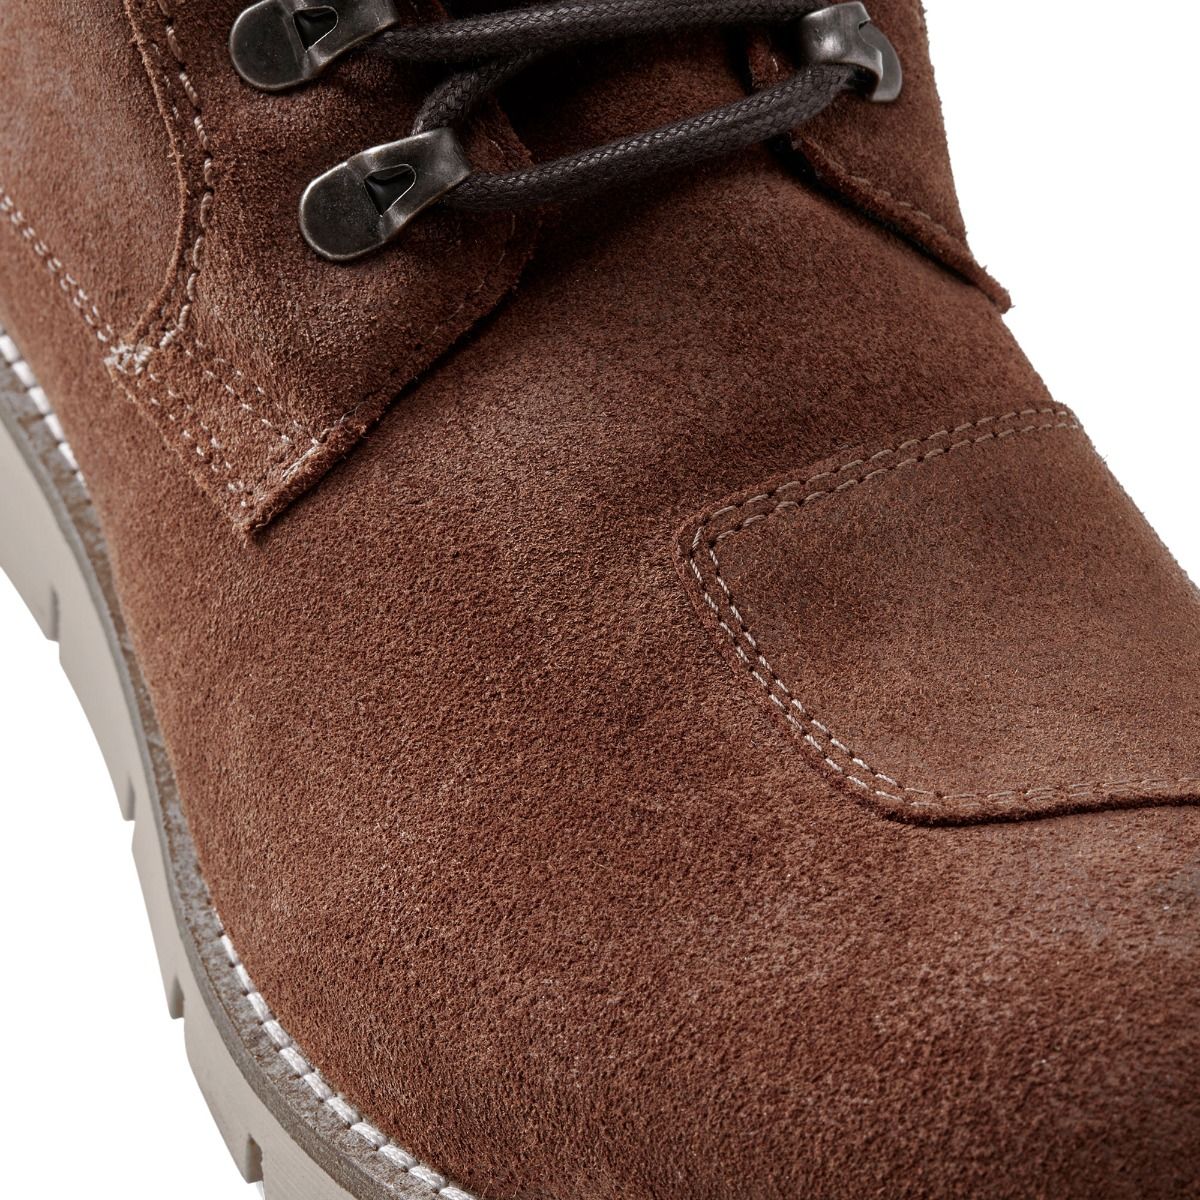 Rev'It Ginza 3 Boots - Brown/White